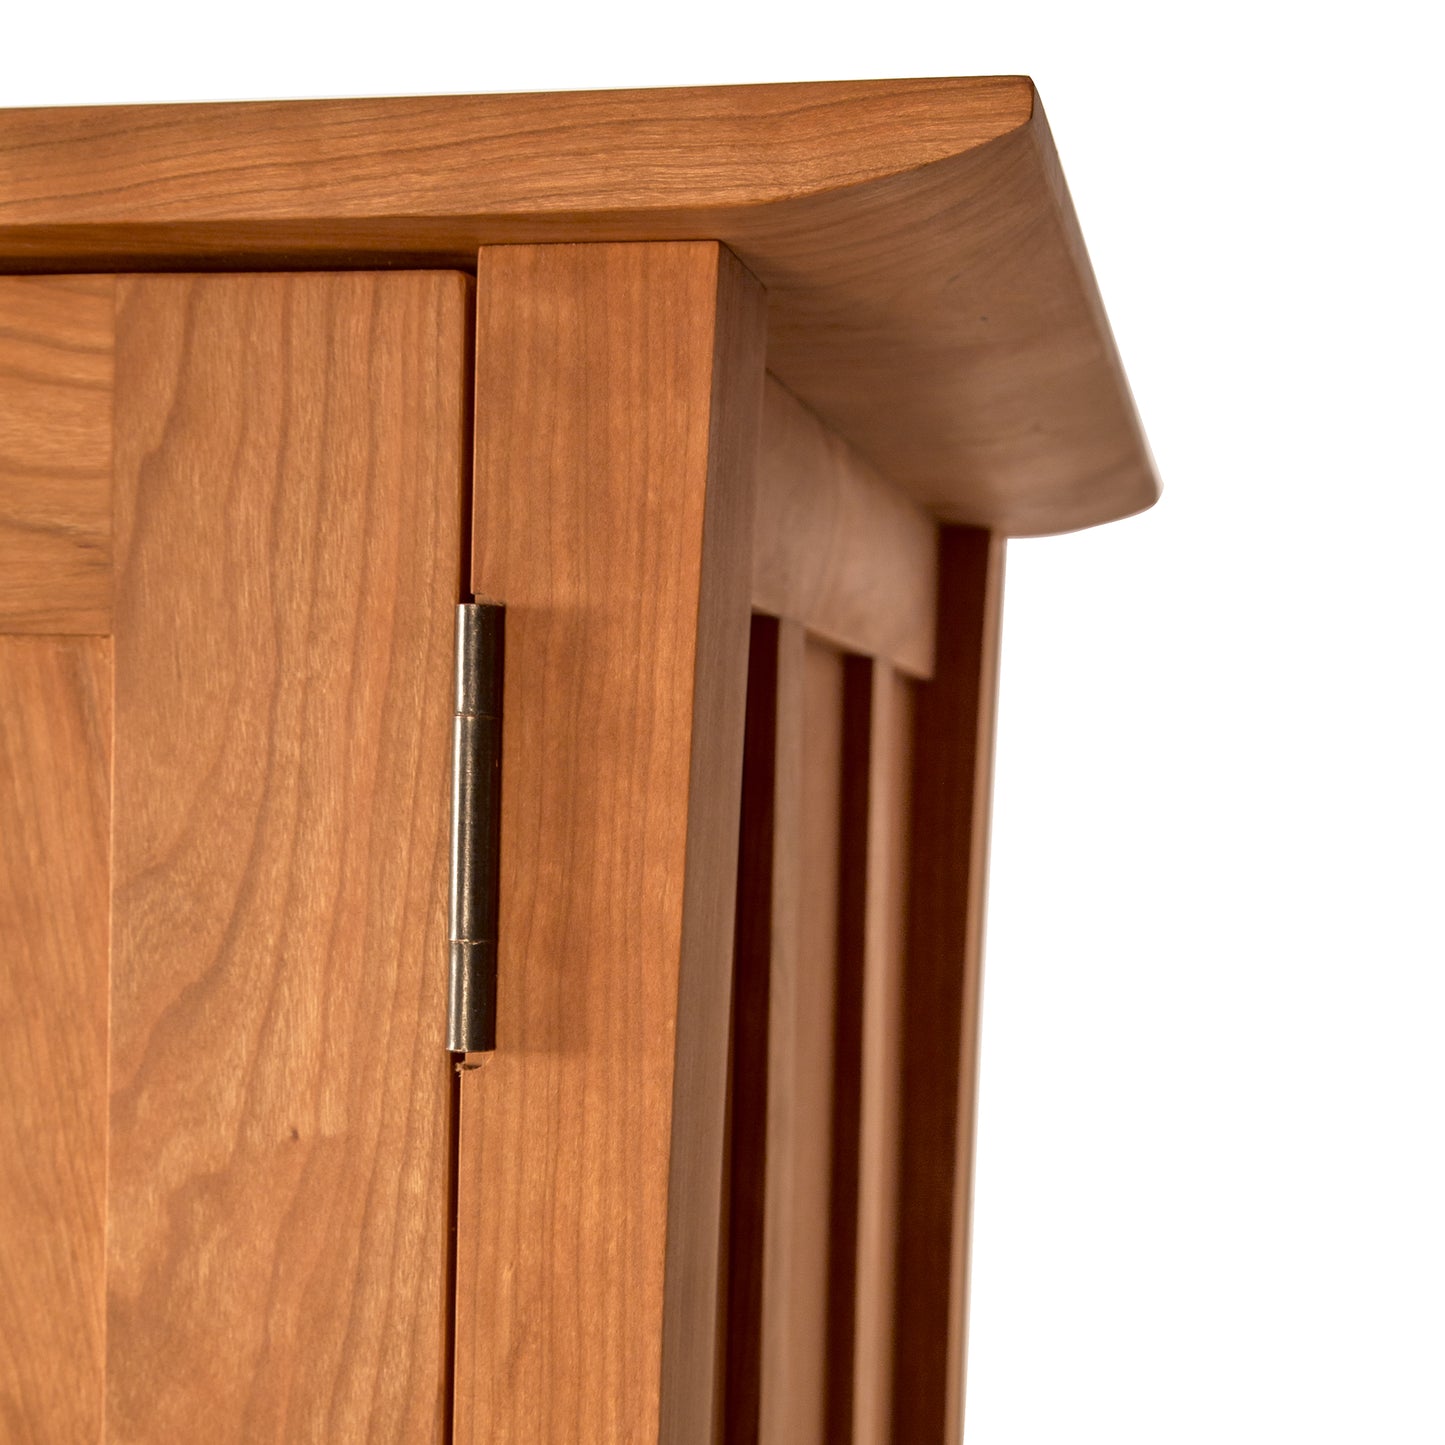 A close up of a Vermont Furniture Designs Contemporary Craftsman Tall Storage Chest with a handle.